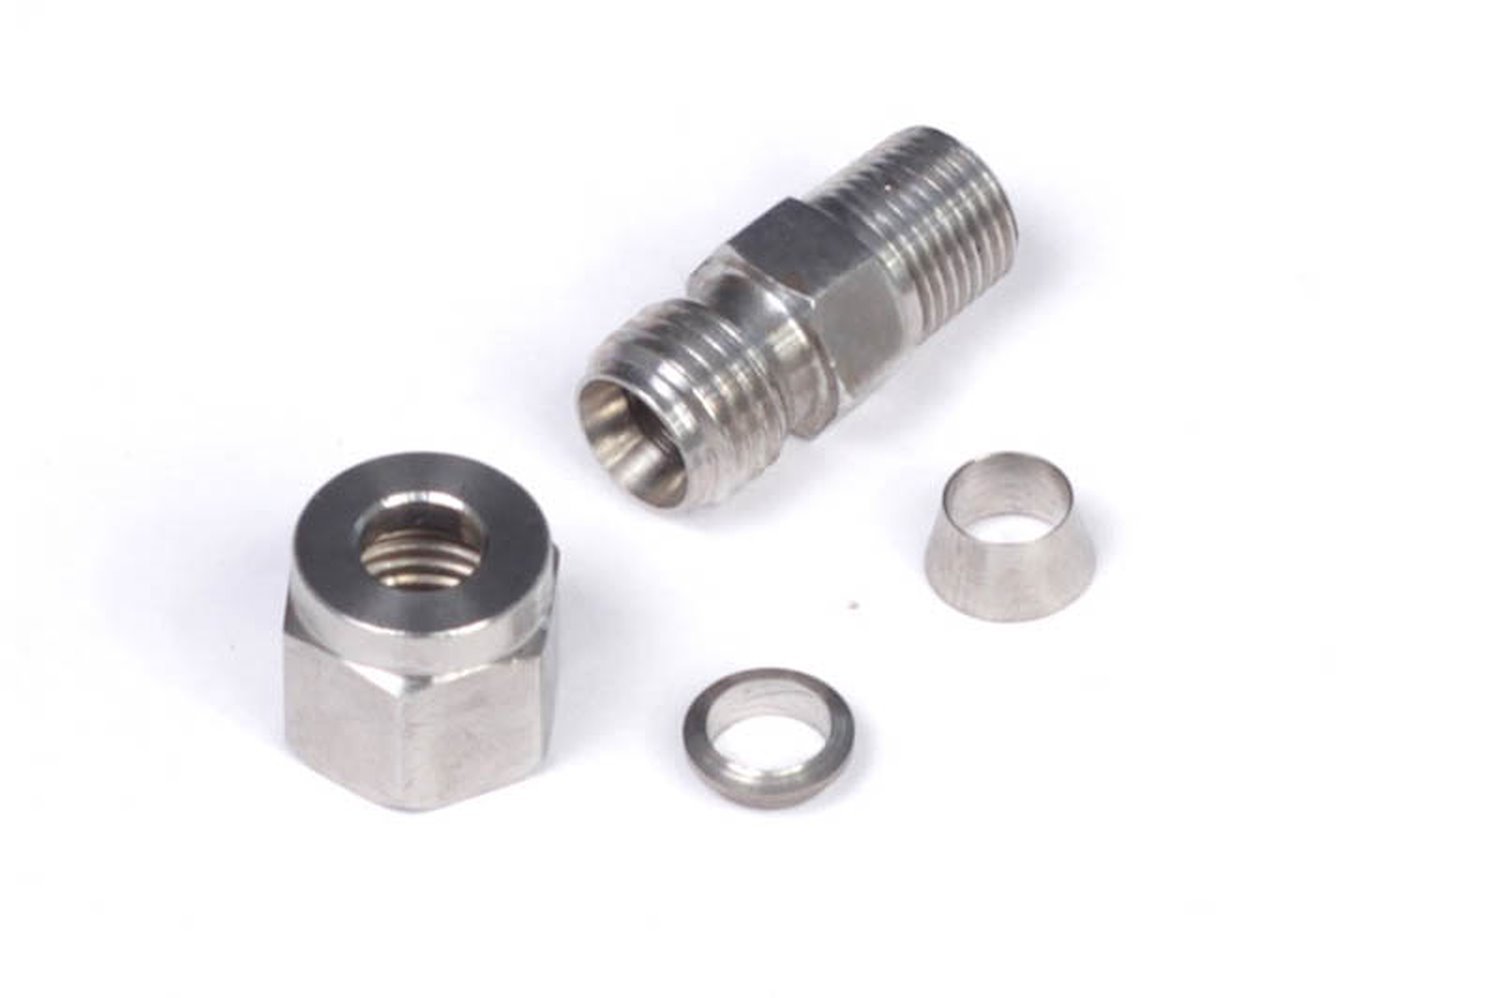 HT-010813 1/4 in. Stainless Compression Fitting Kit, 1/8 in. NPT Thread